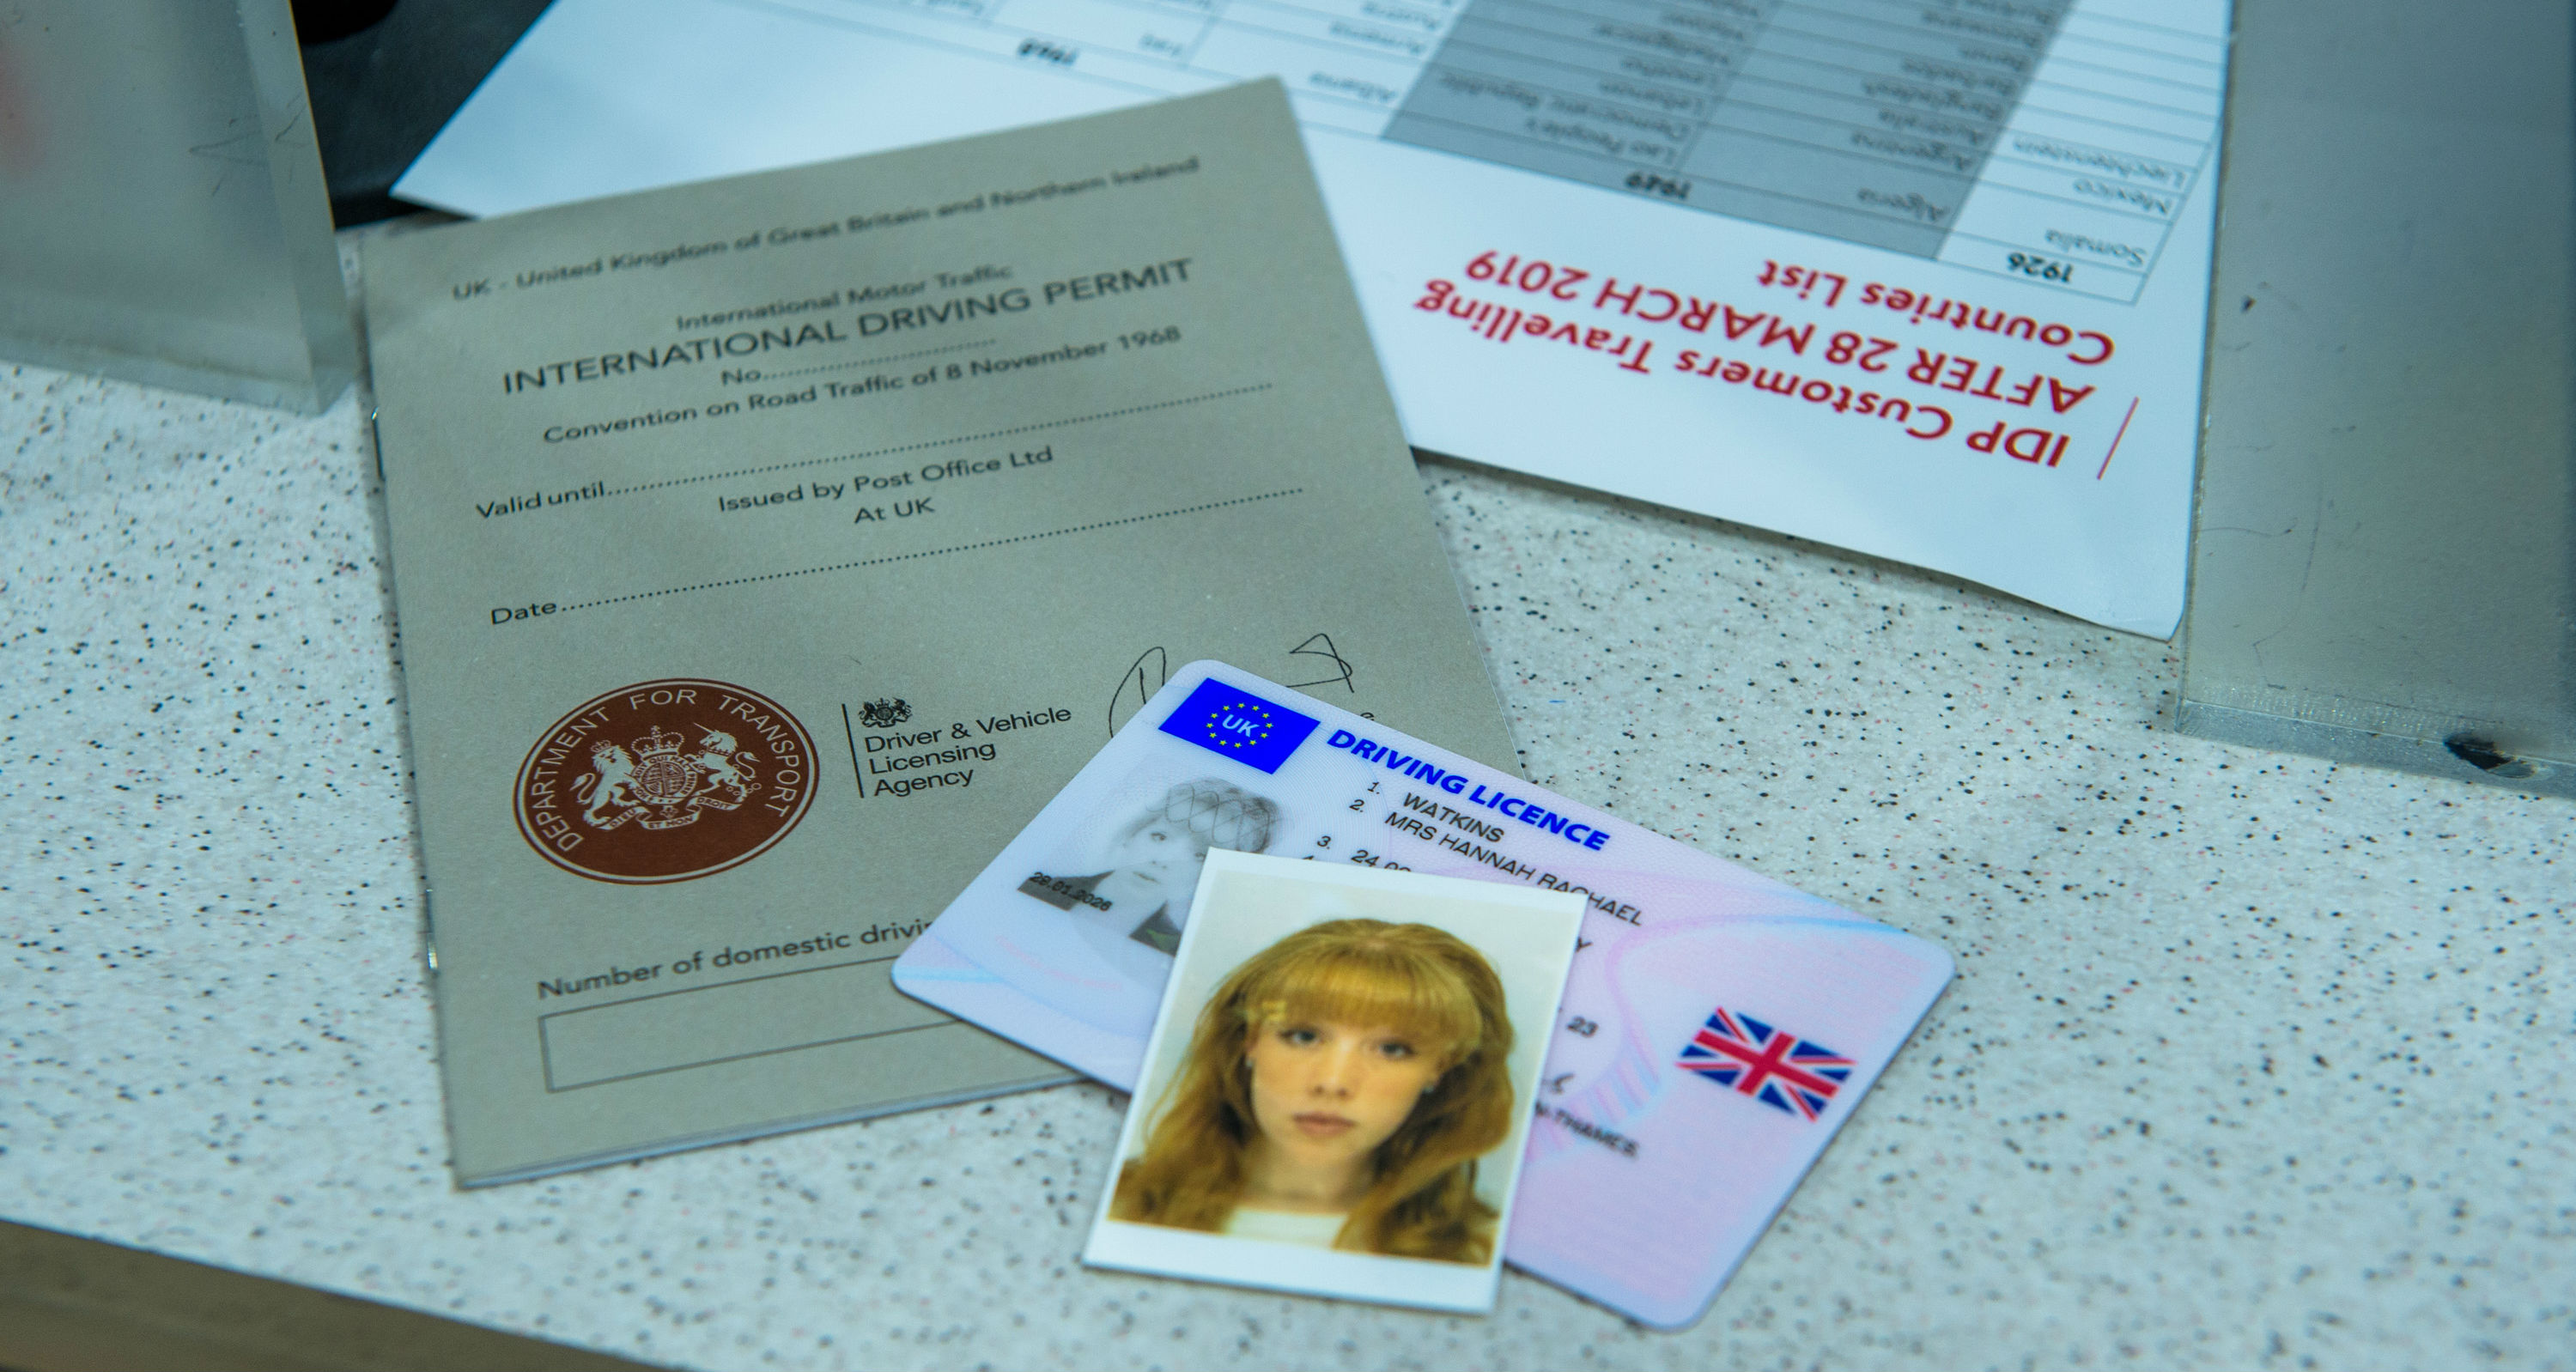 Post Office expands International Driving Permit services